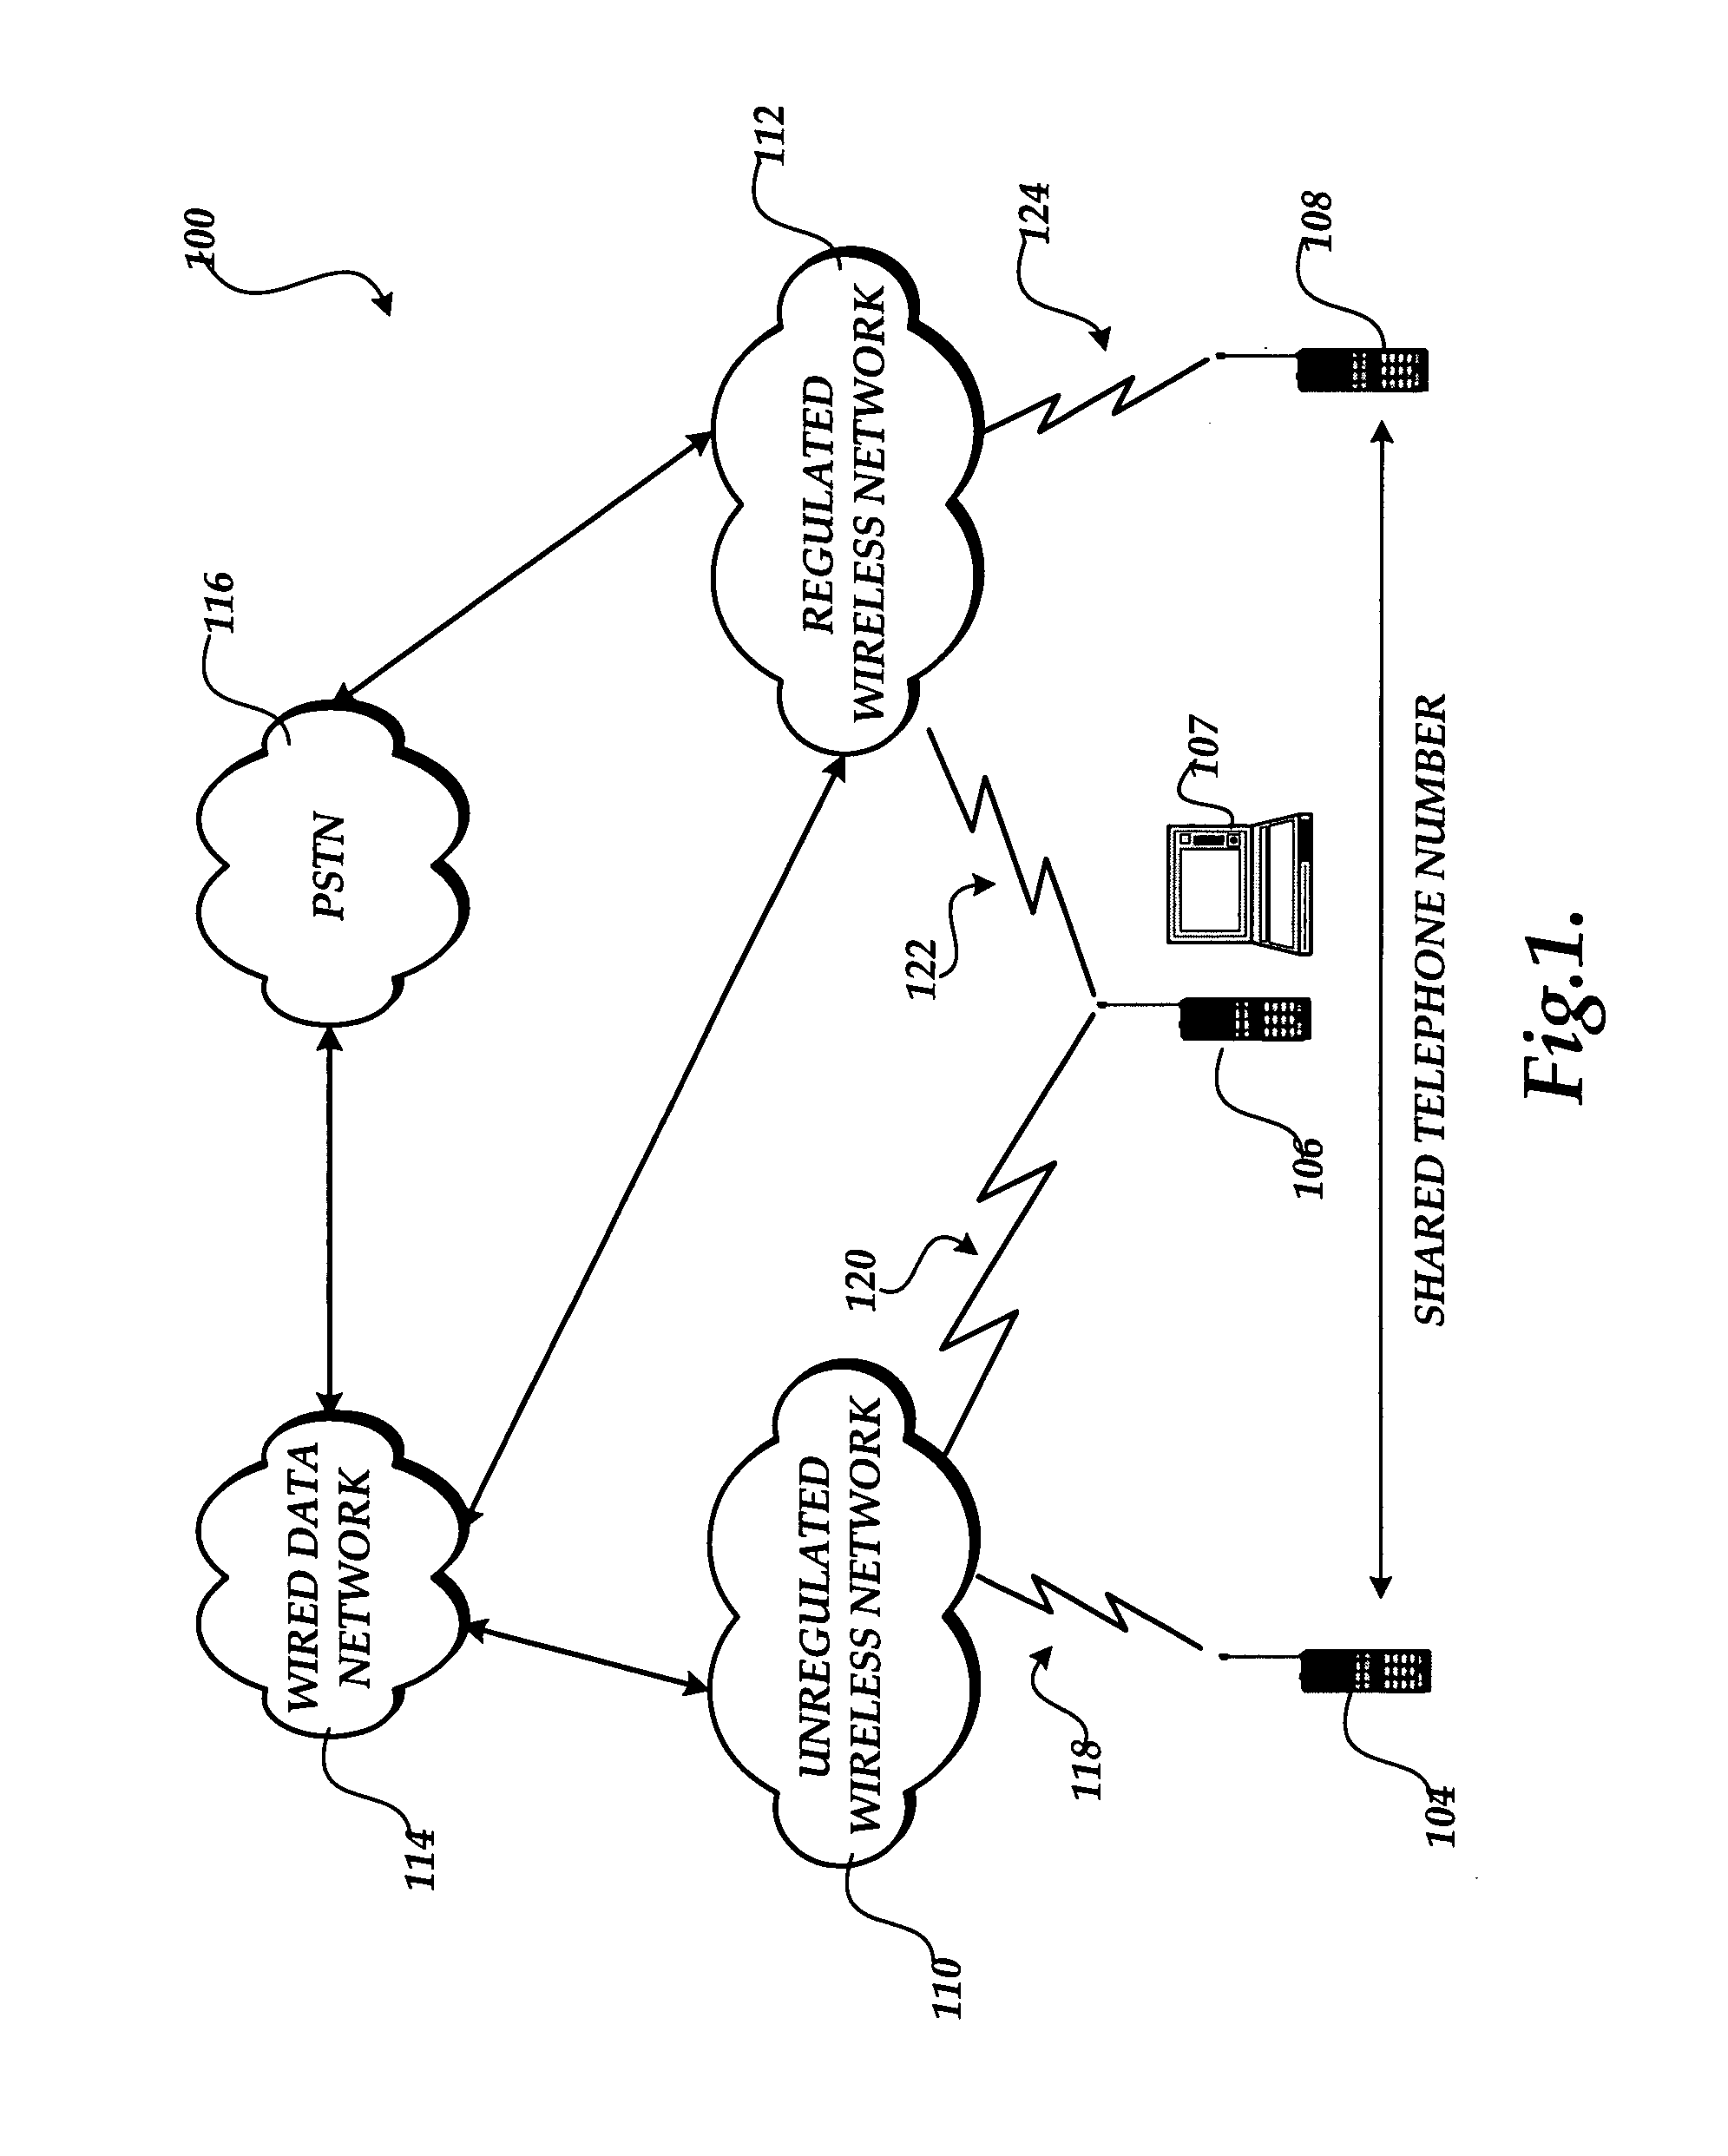 System and method for providing integrated voice and data services utilizing wired cordless access with unlicensed spectrum and wired access with licensed spectrum